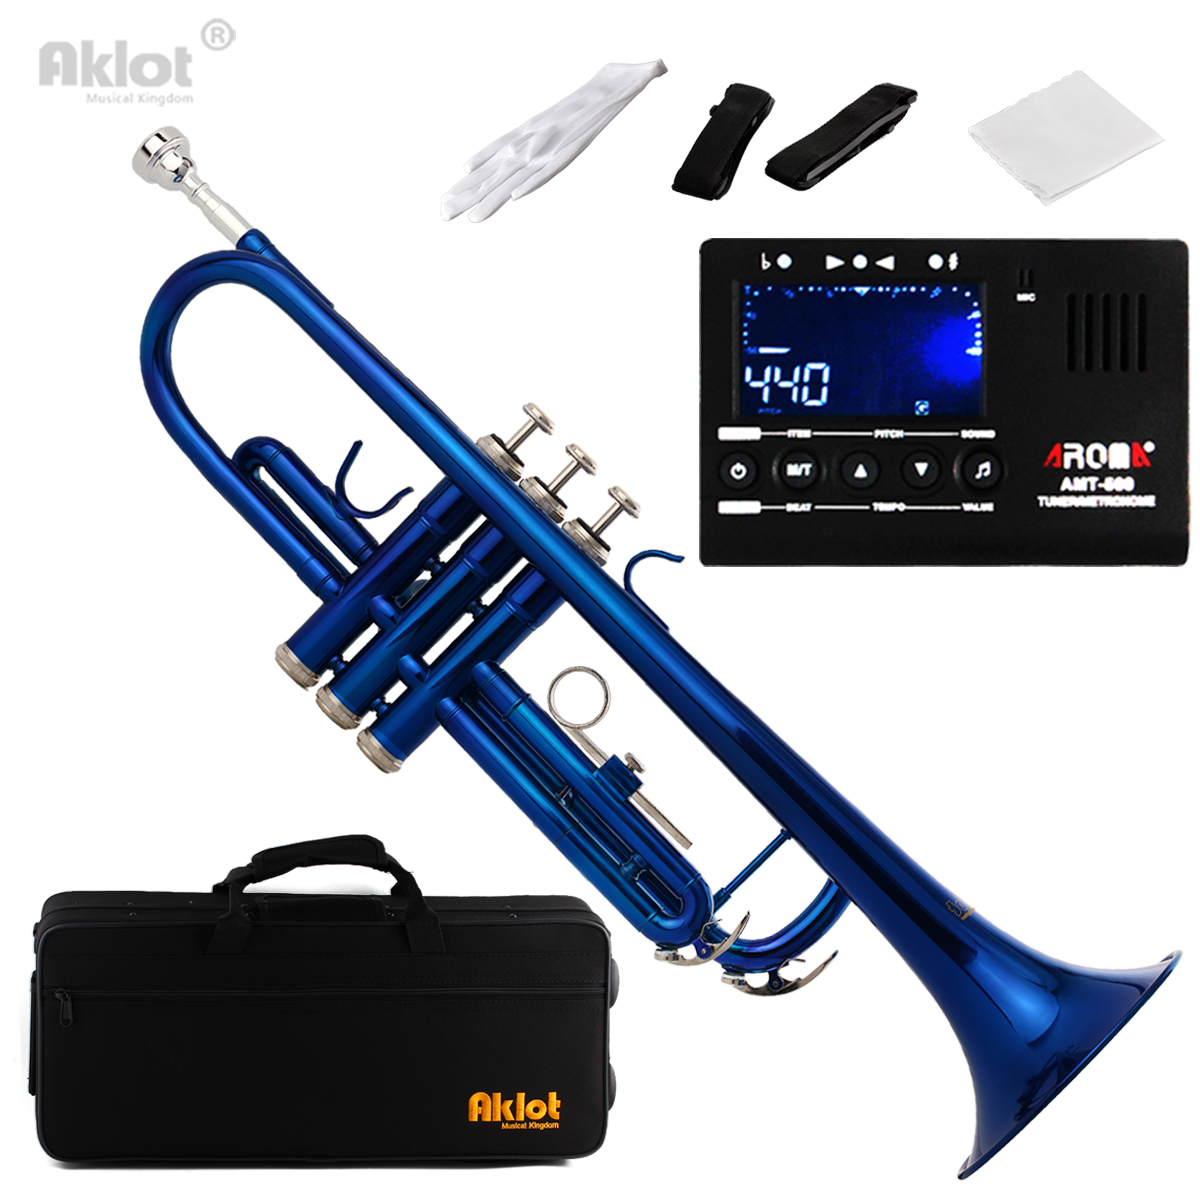 Aklot Bb B Flat Beginner Marching Band Trumpet Brass Body Silver Plated Mouthpiece Blue with Tuner